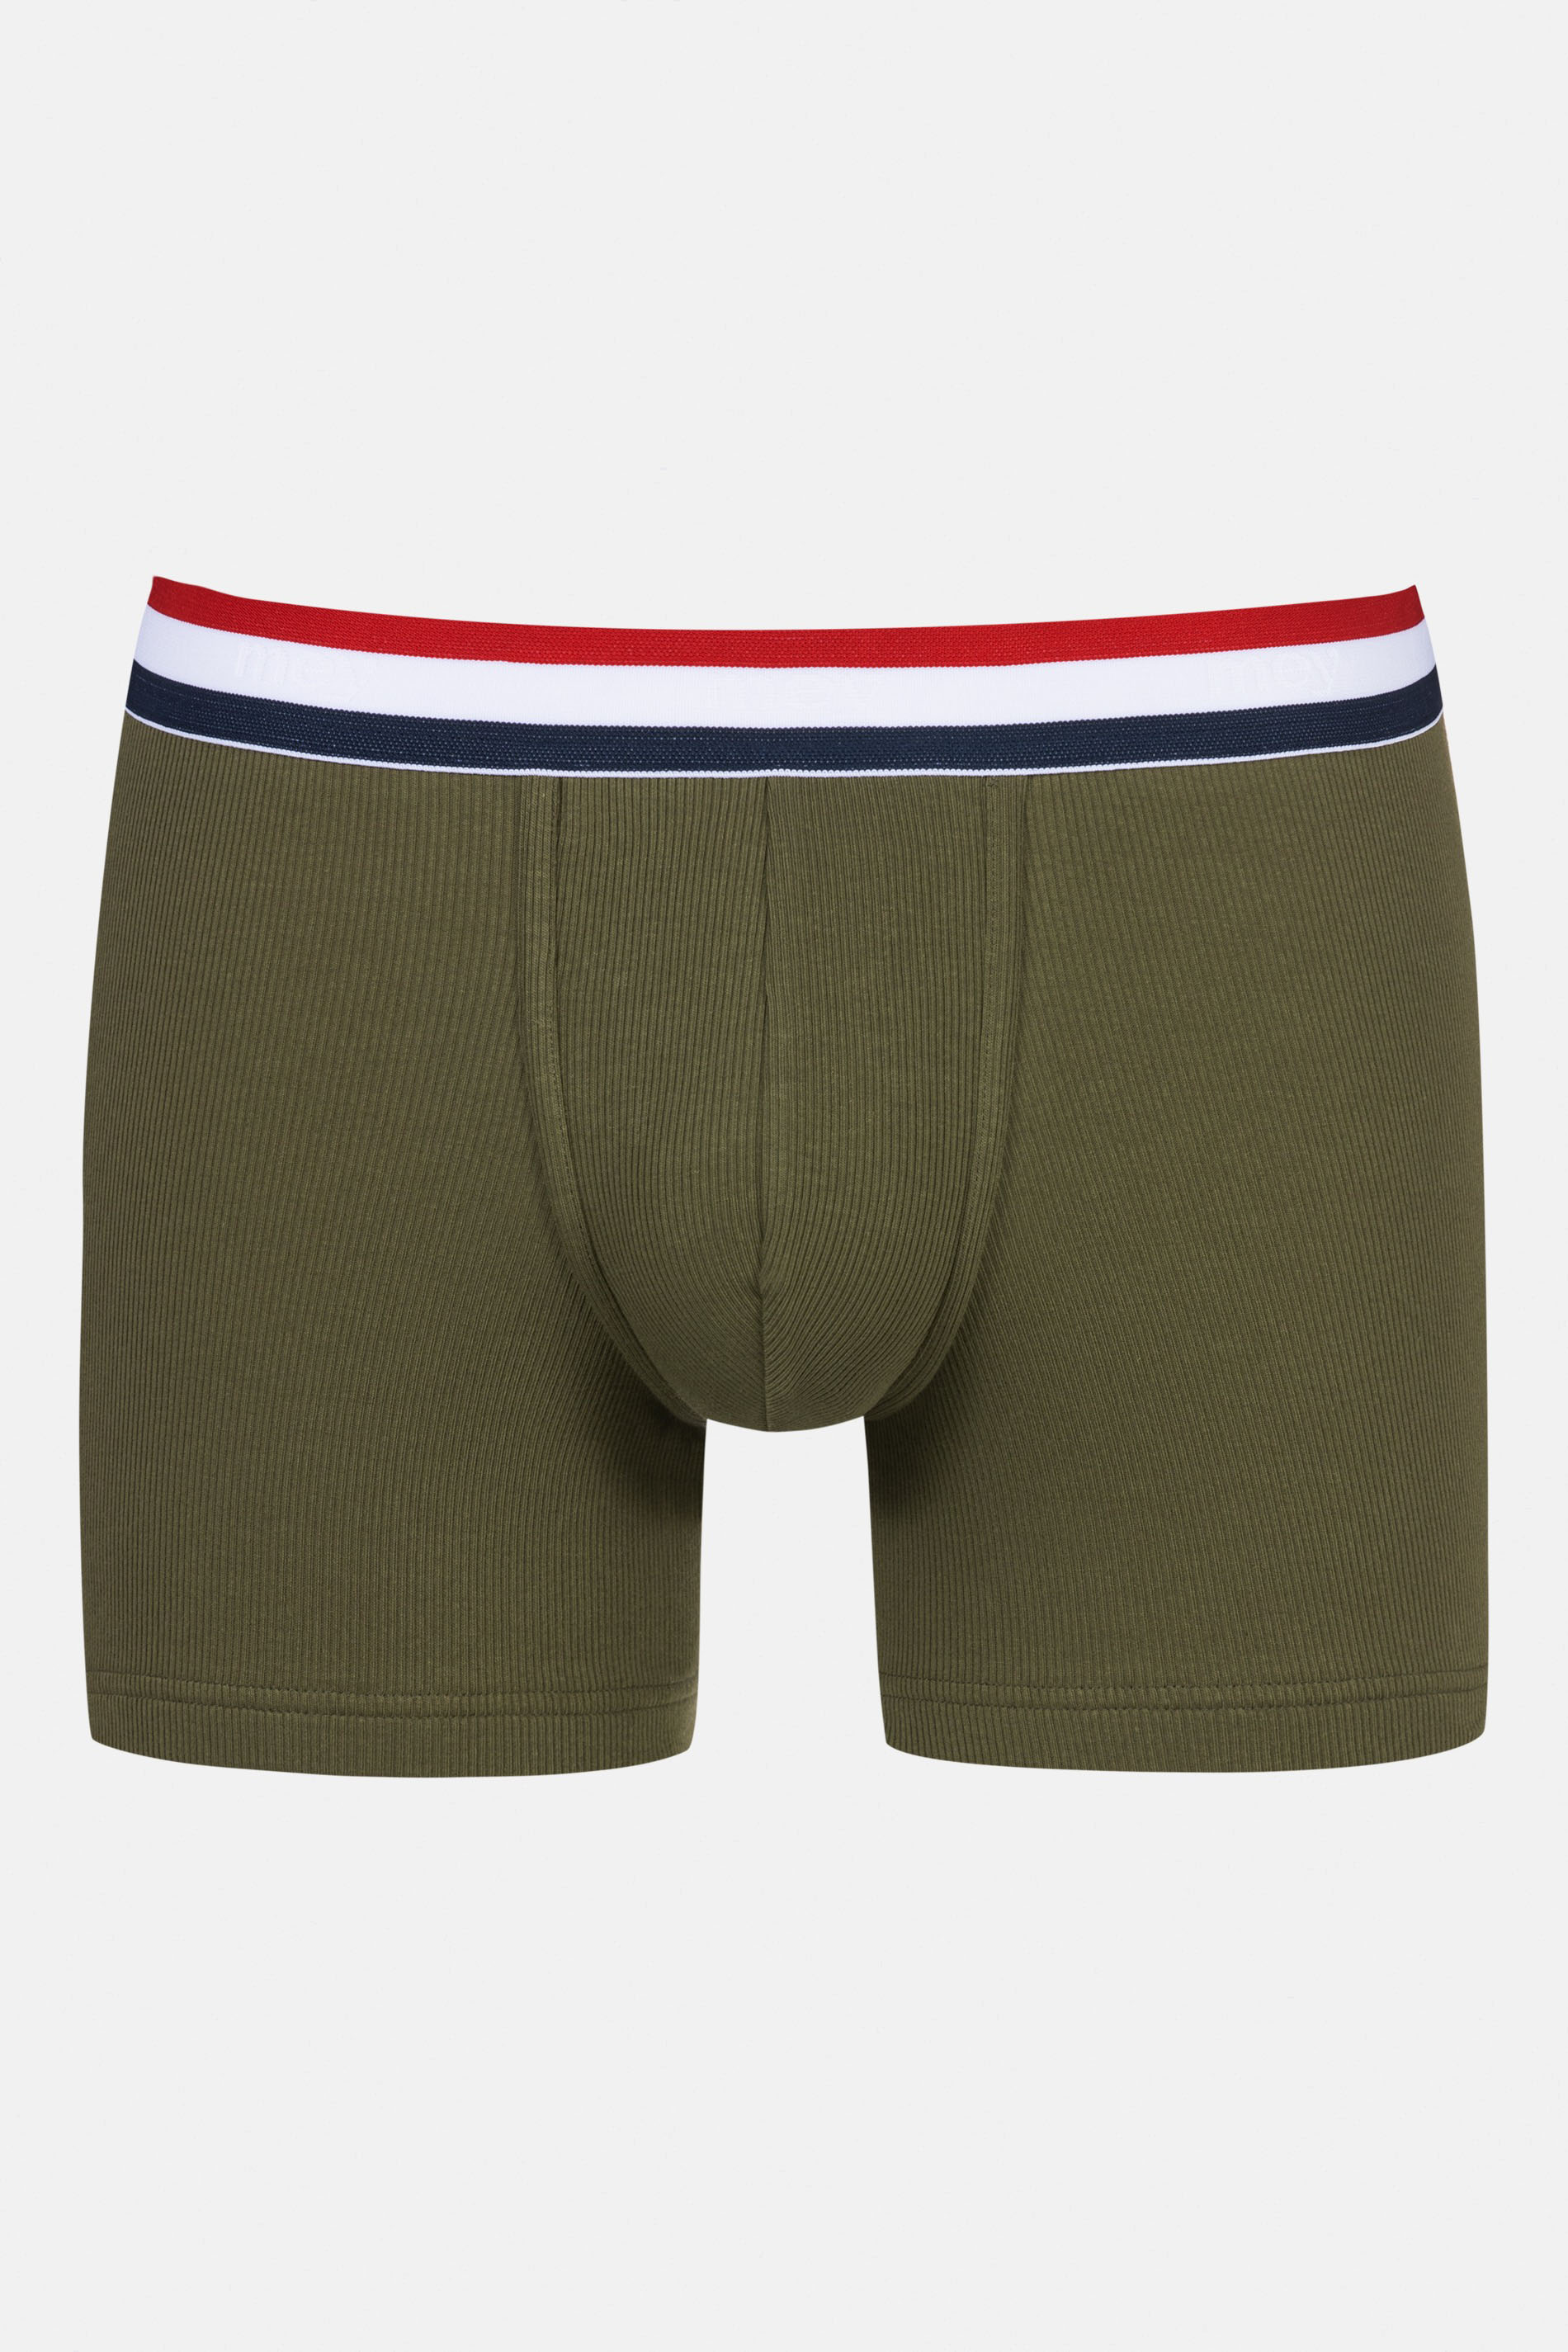 Trunk shorty Serie RE:THINK RIB Uitknippen | mey®